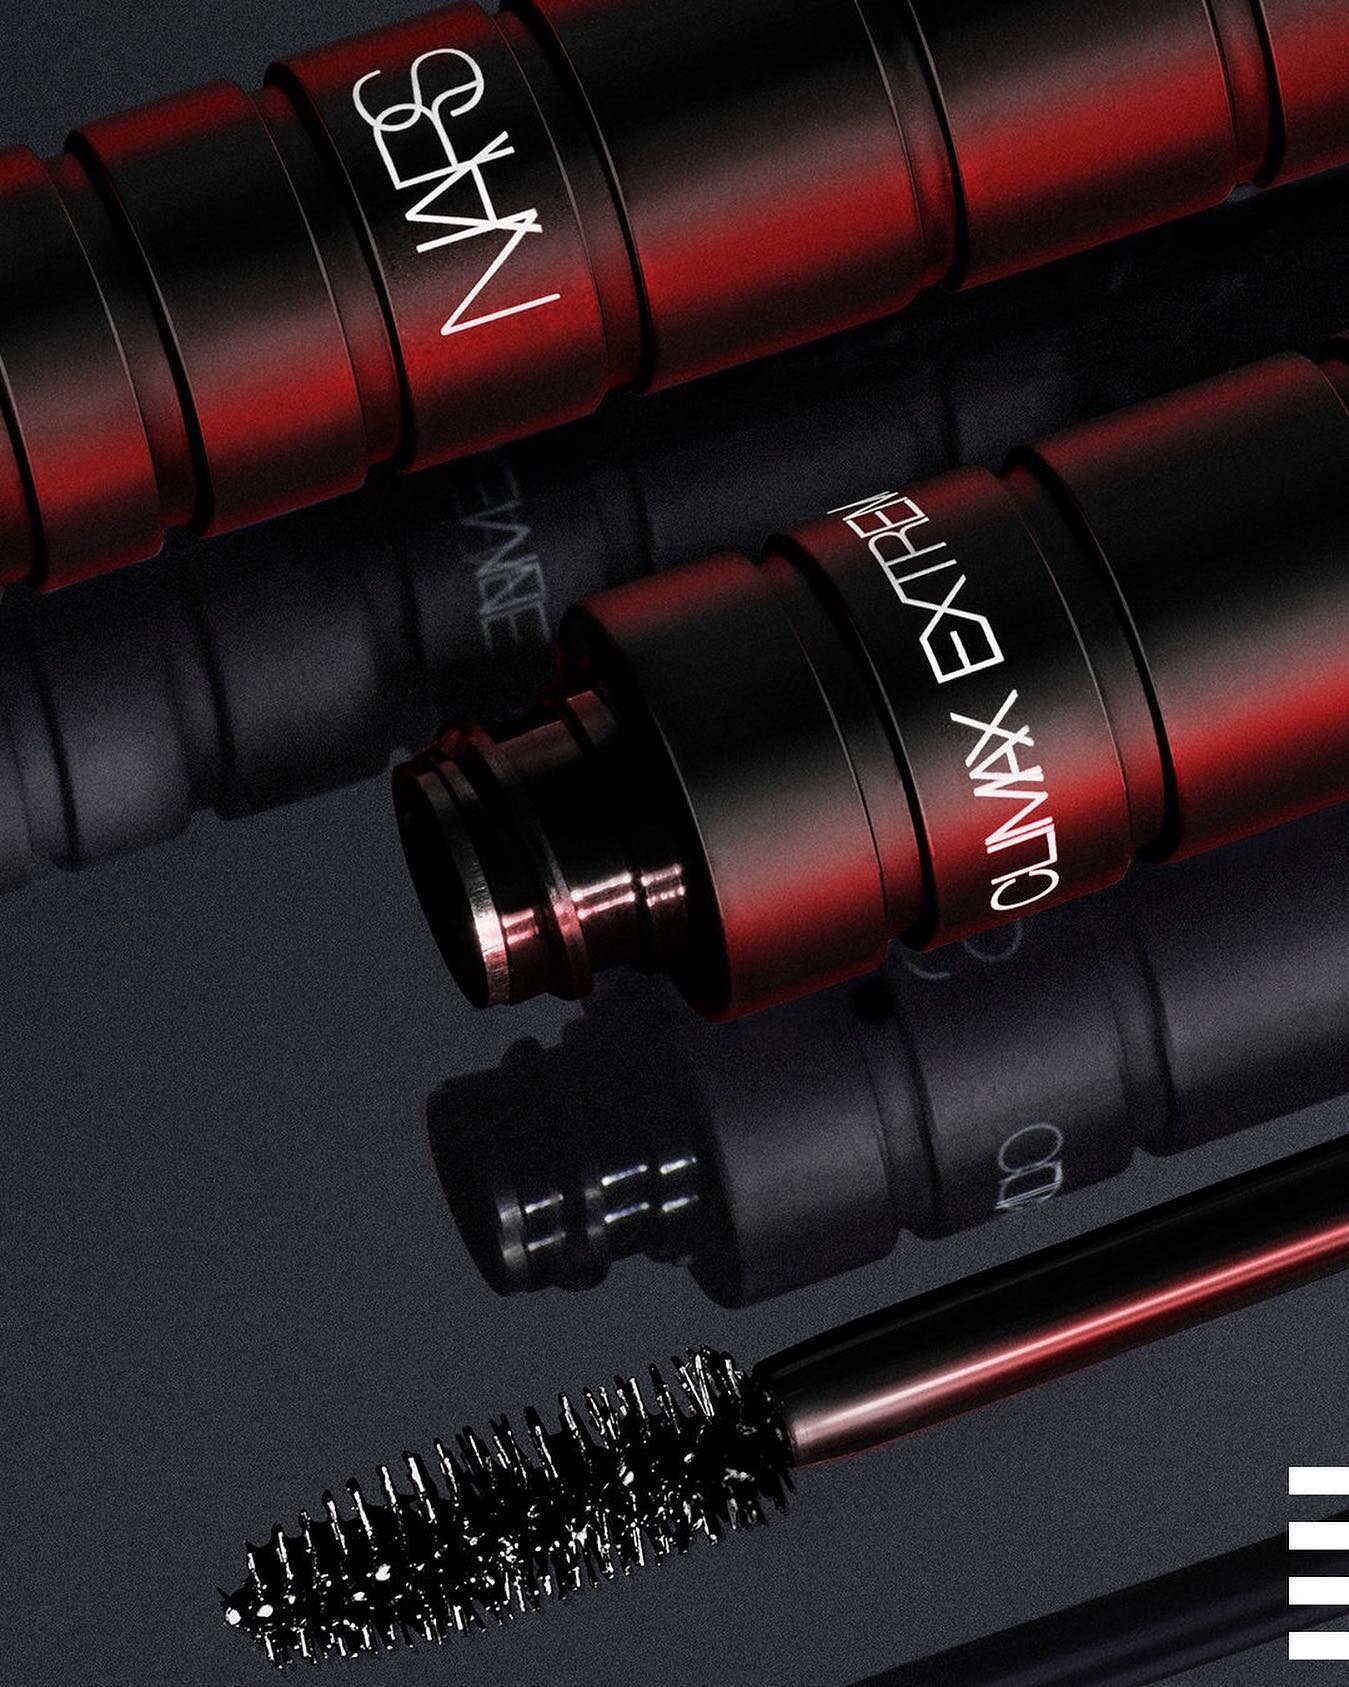 Your lashes called, they want their groove back 📞 And the new @narsissist Climax Extreme Volume Mascara is bringing it with explosive volume and extreme pigment 💯